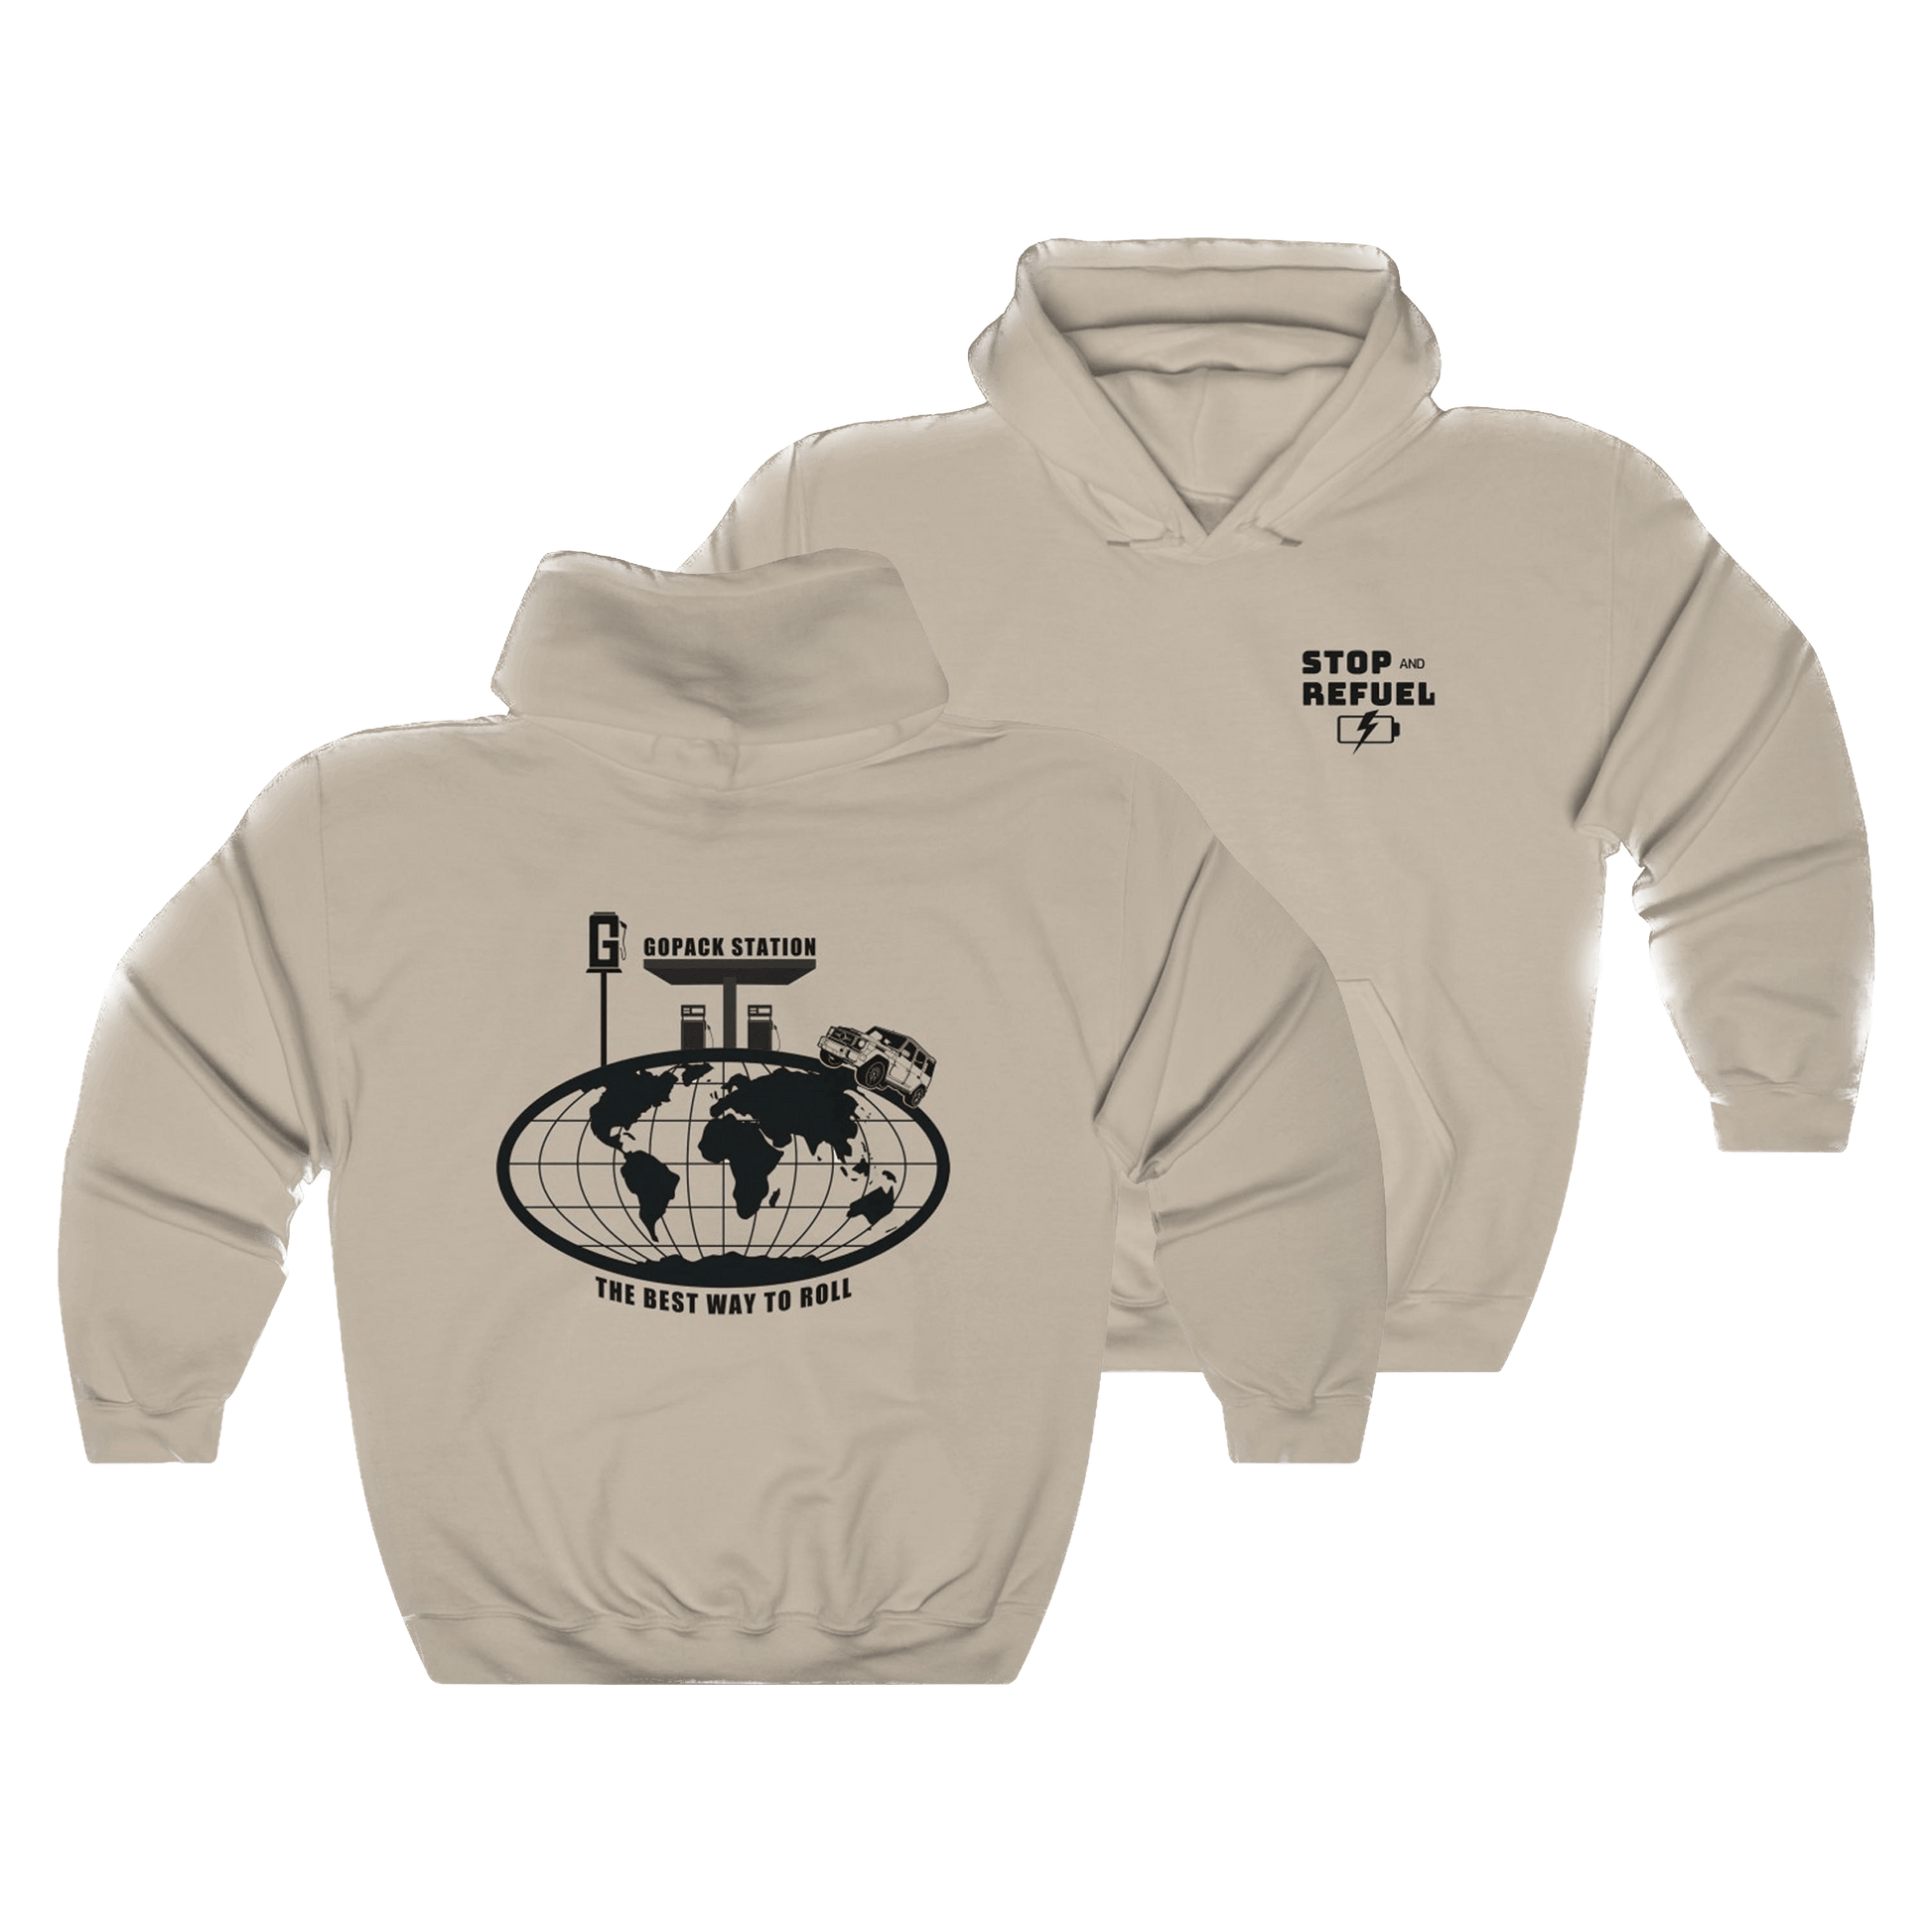 Tan Stylish and comfortable Gopack Station hoodies featuring the iconic Gopack logo